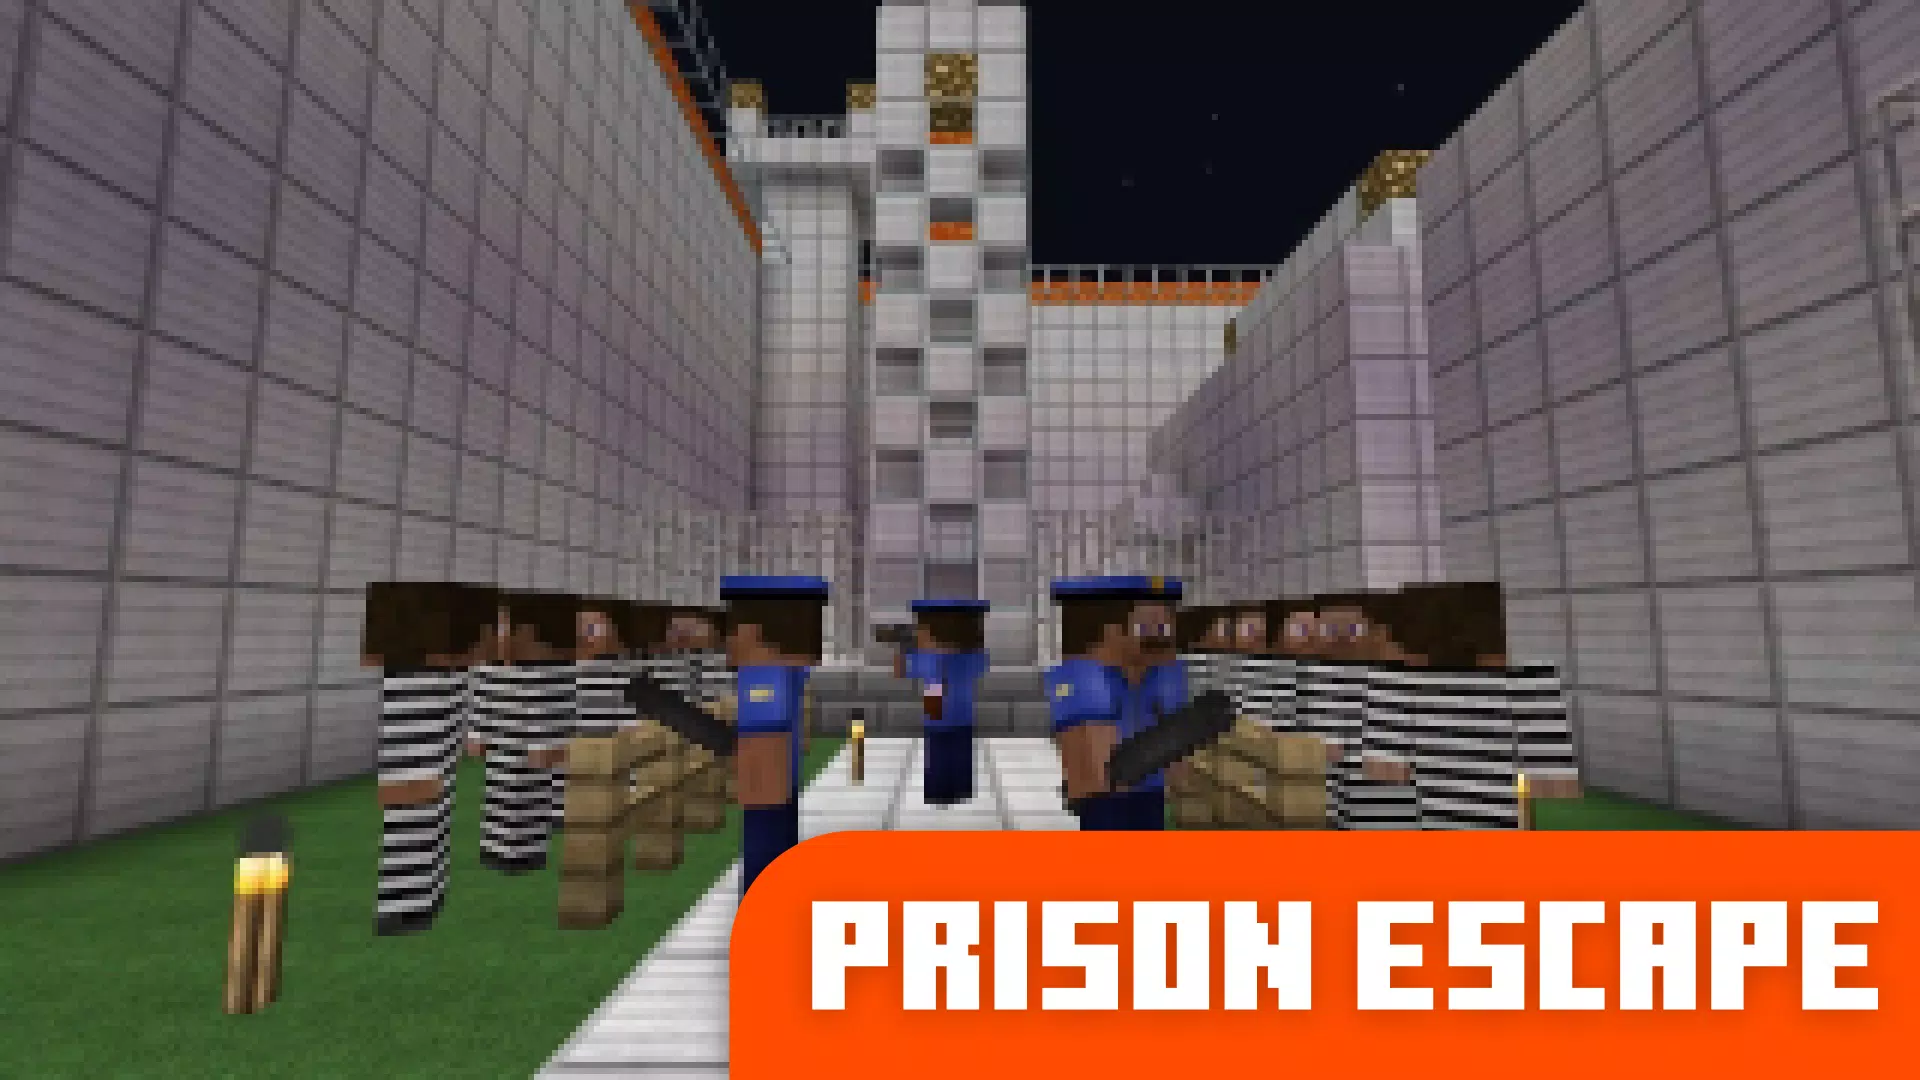 Jailbreak for minecraft para Android - Download